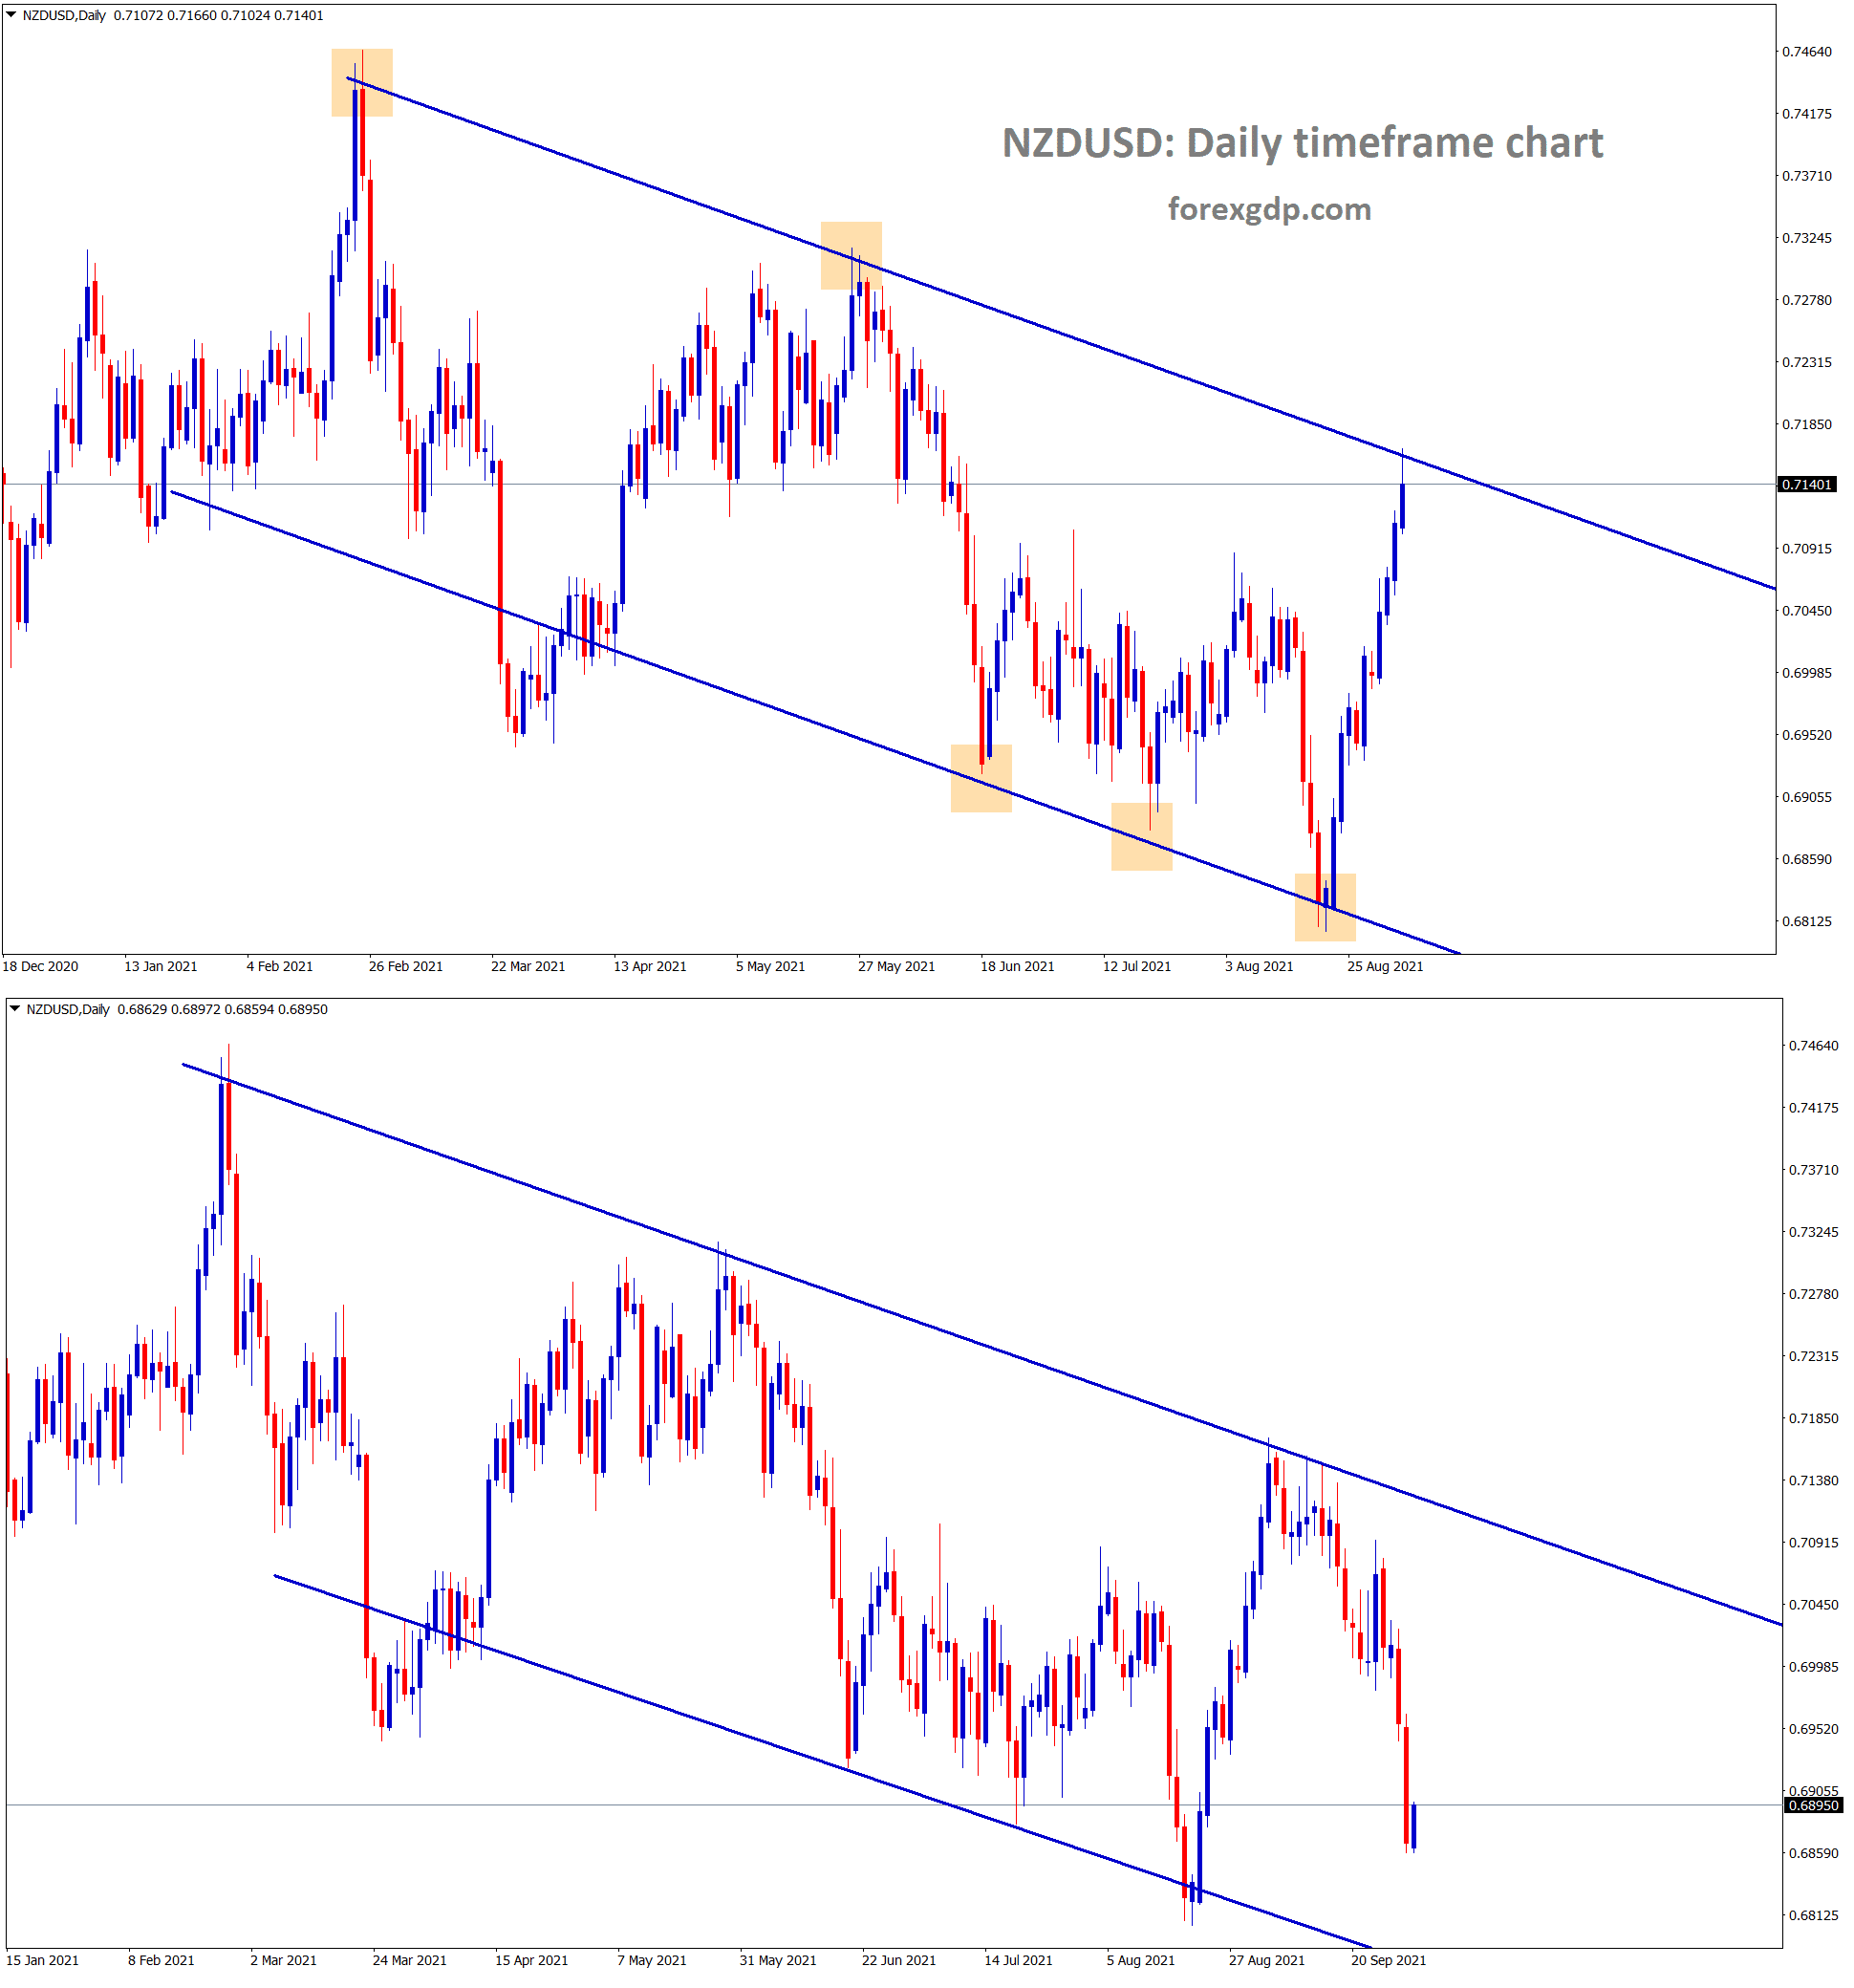 NZDUSD fell down more in this week from the lower high area of the descending channel